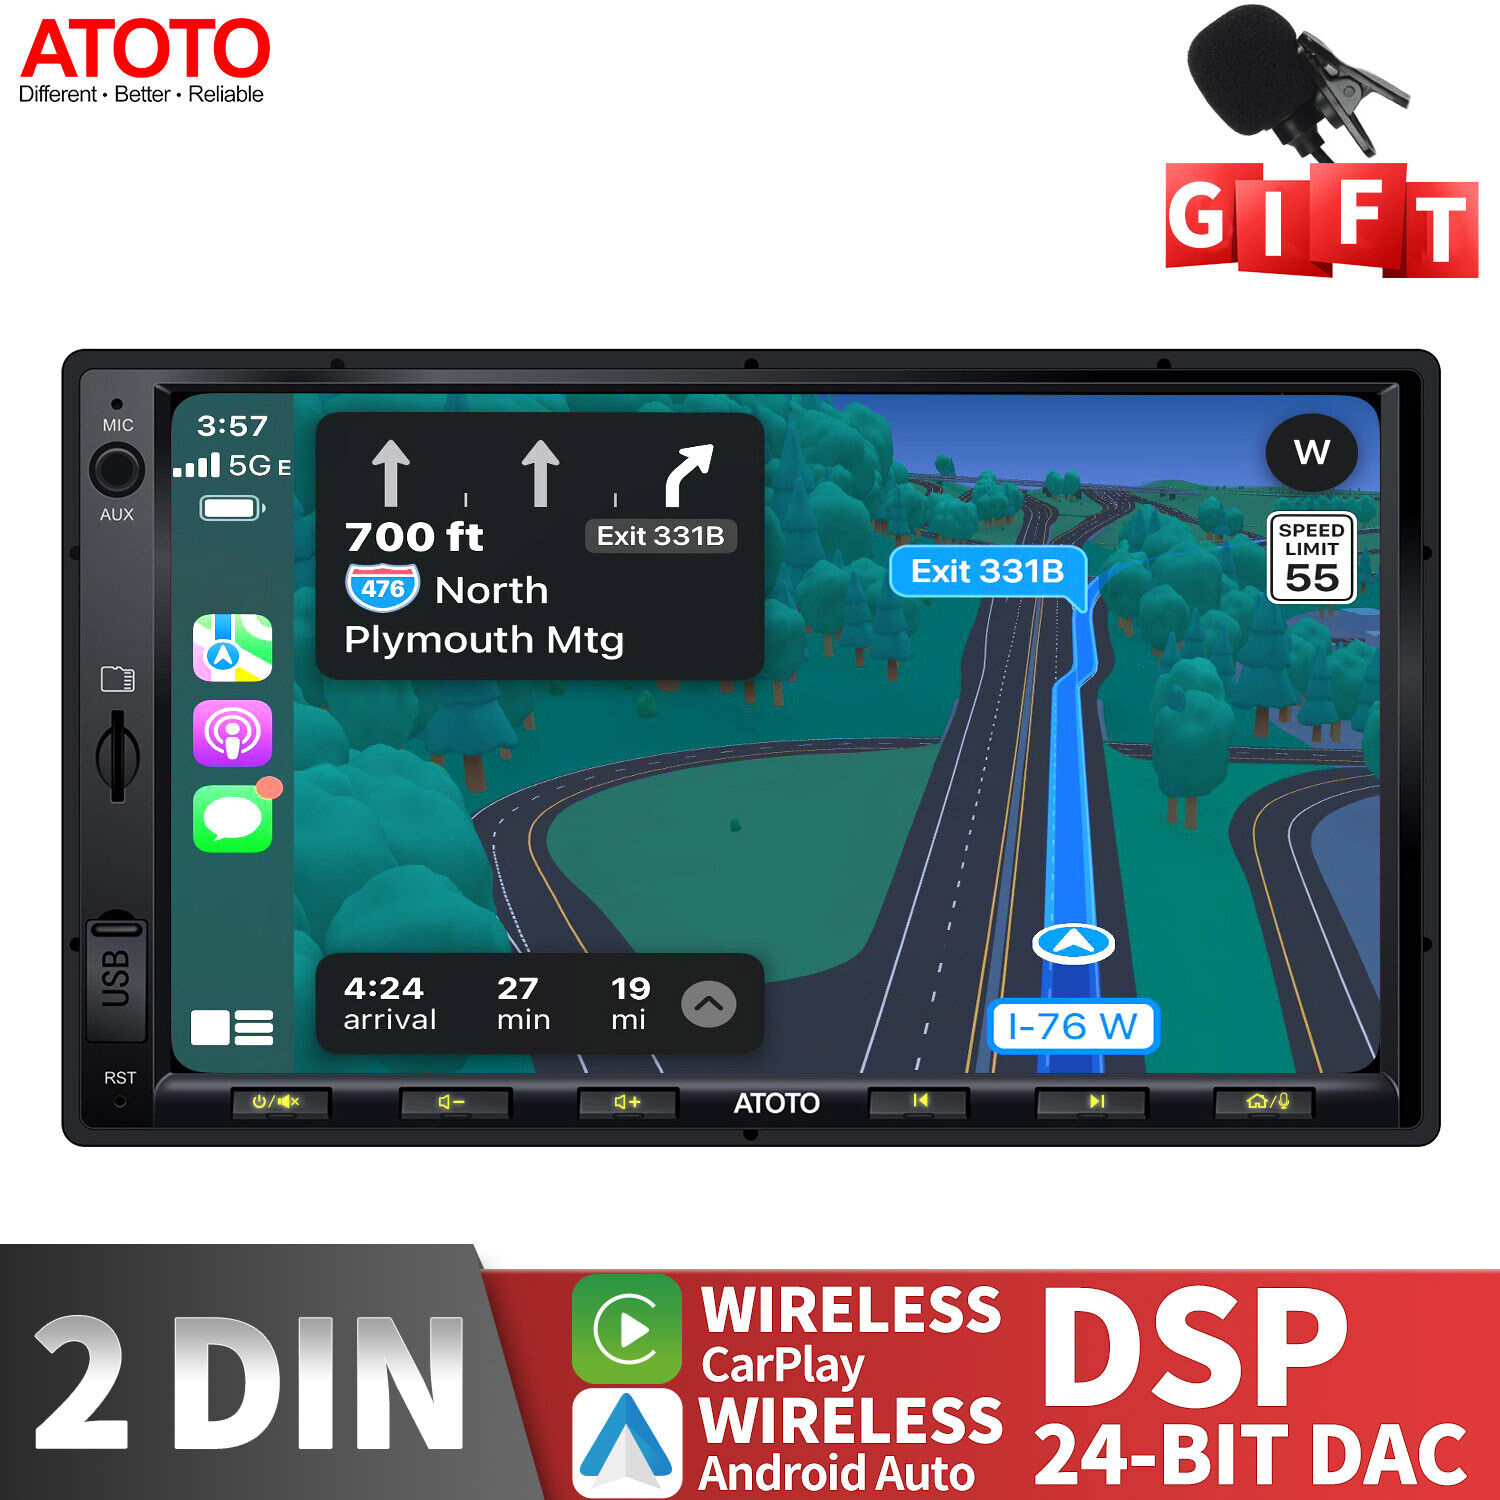 ATOTO F7 WE 7in Bluetooth Car Stereo Double DIN Wireless CarPlay & Android Auto